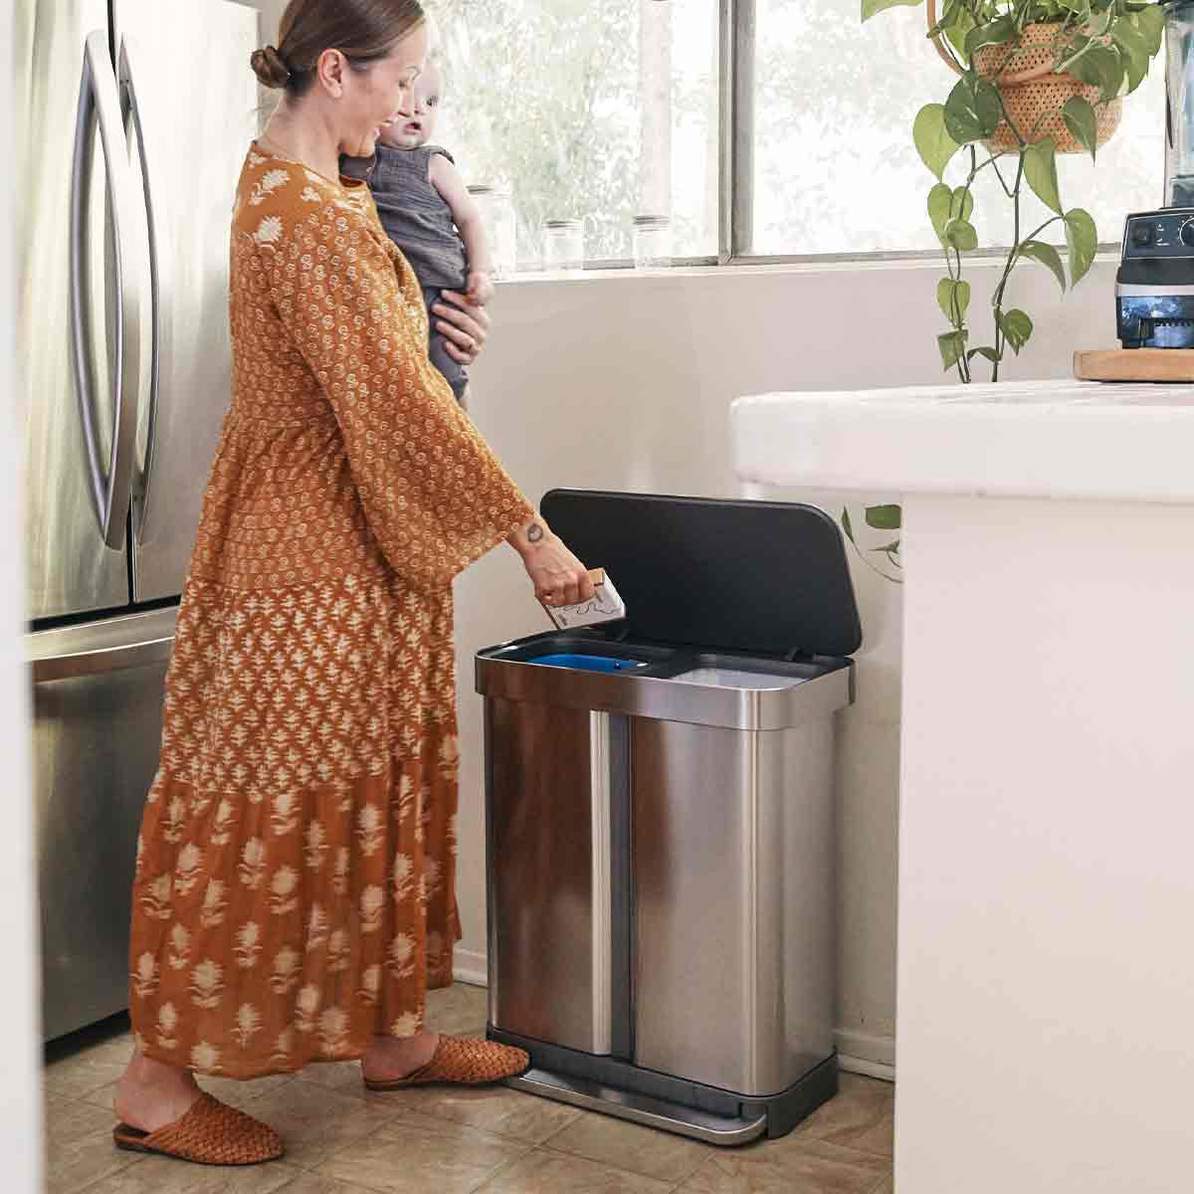 Simplehuman 58L Garbage Can Review - Simplehuman Dual Compartment Trash Can  